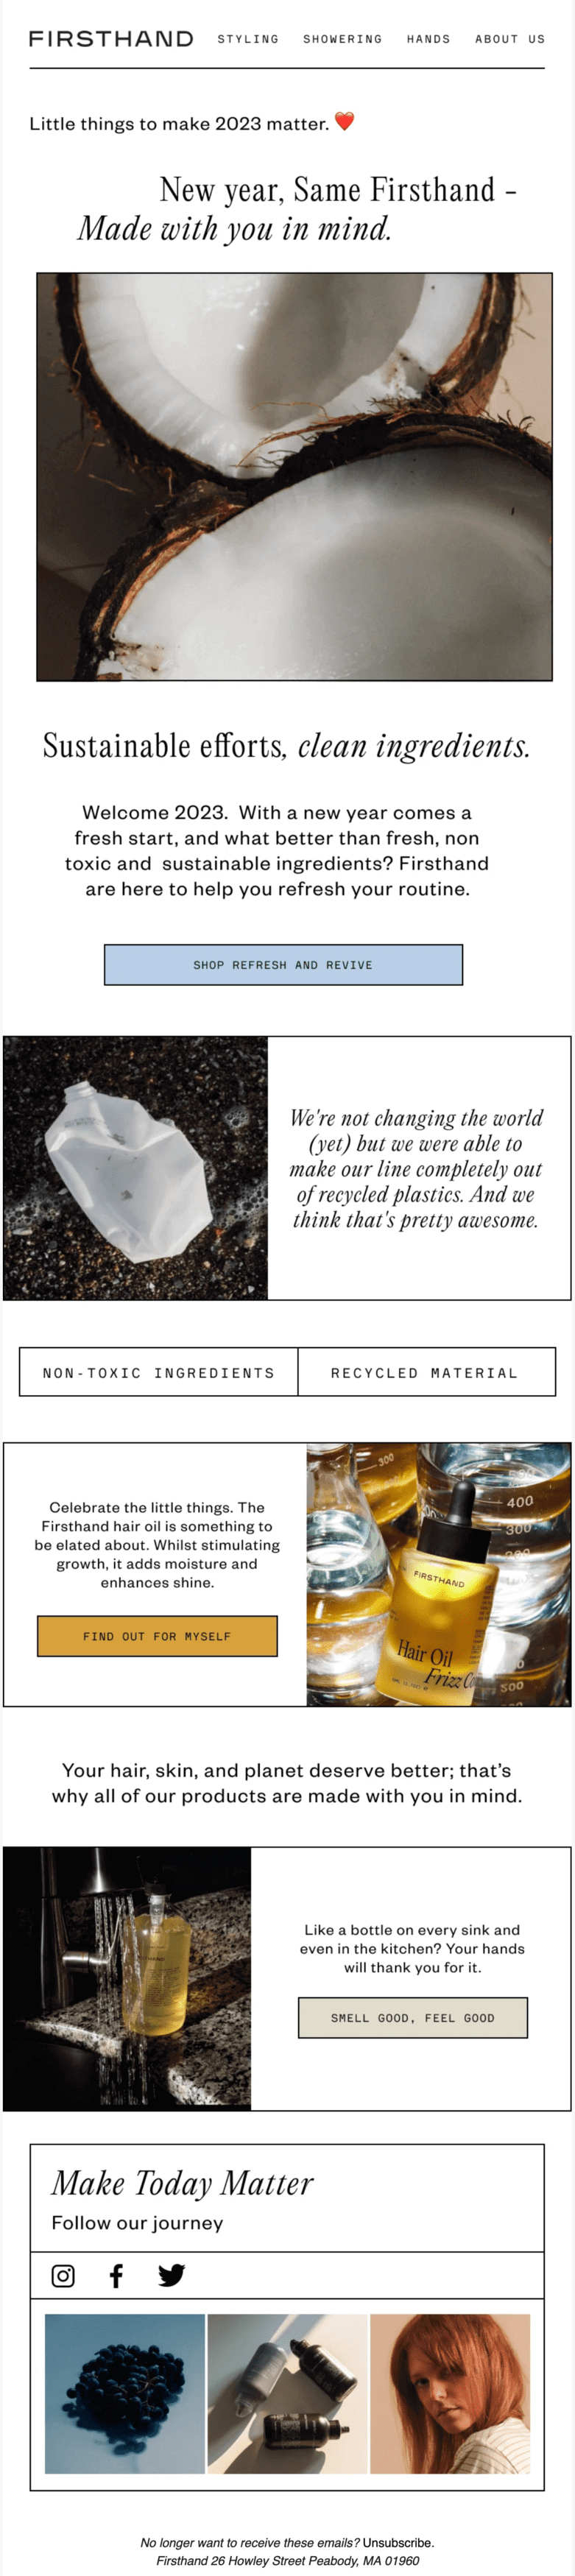 An email from Firsthand detailing the brand’s sustainability efforts